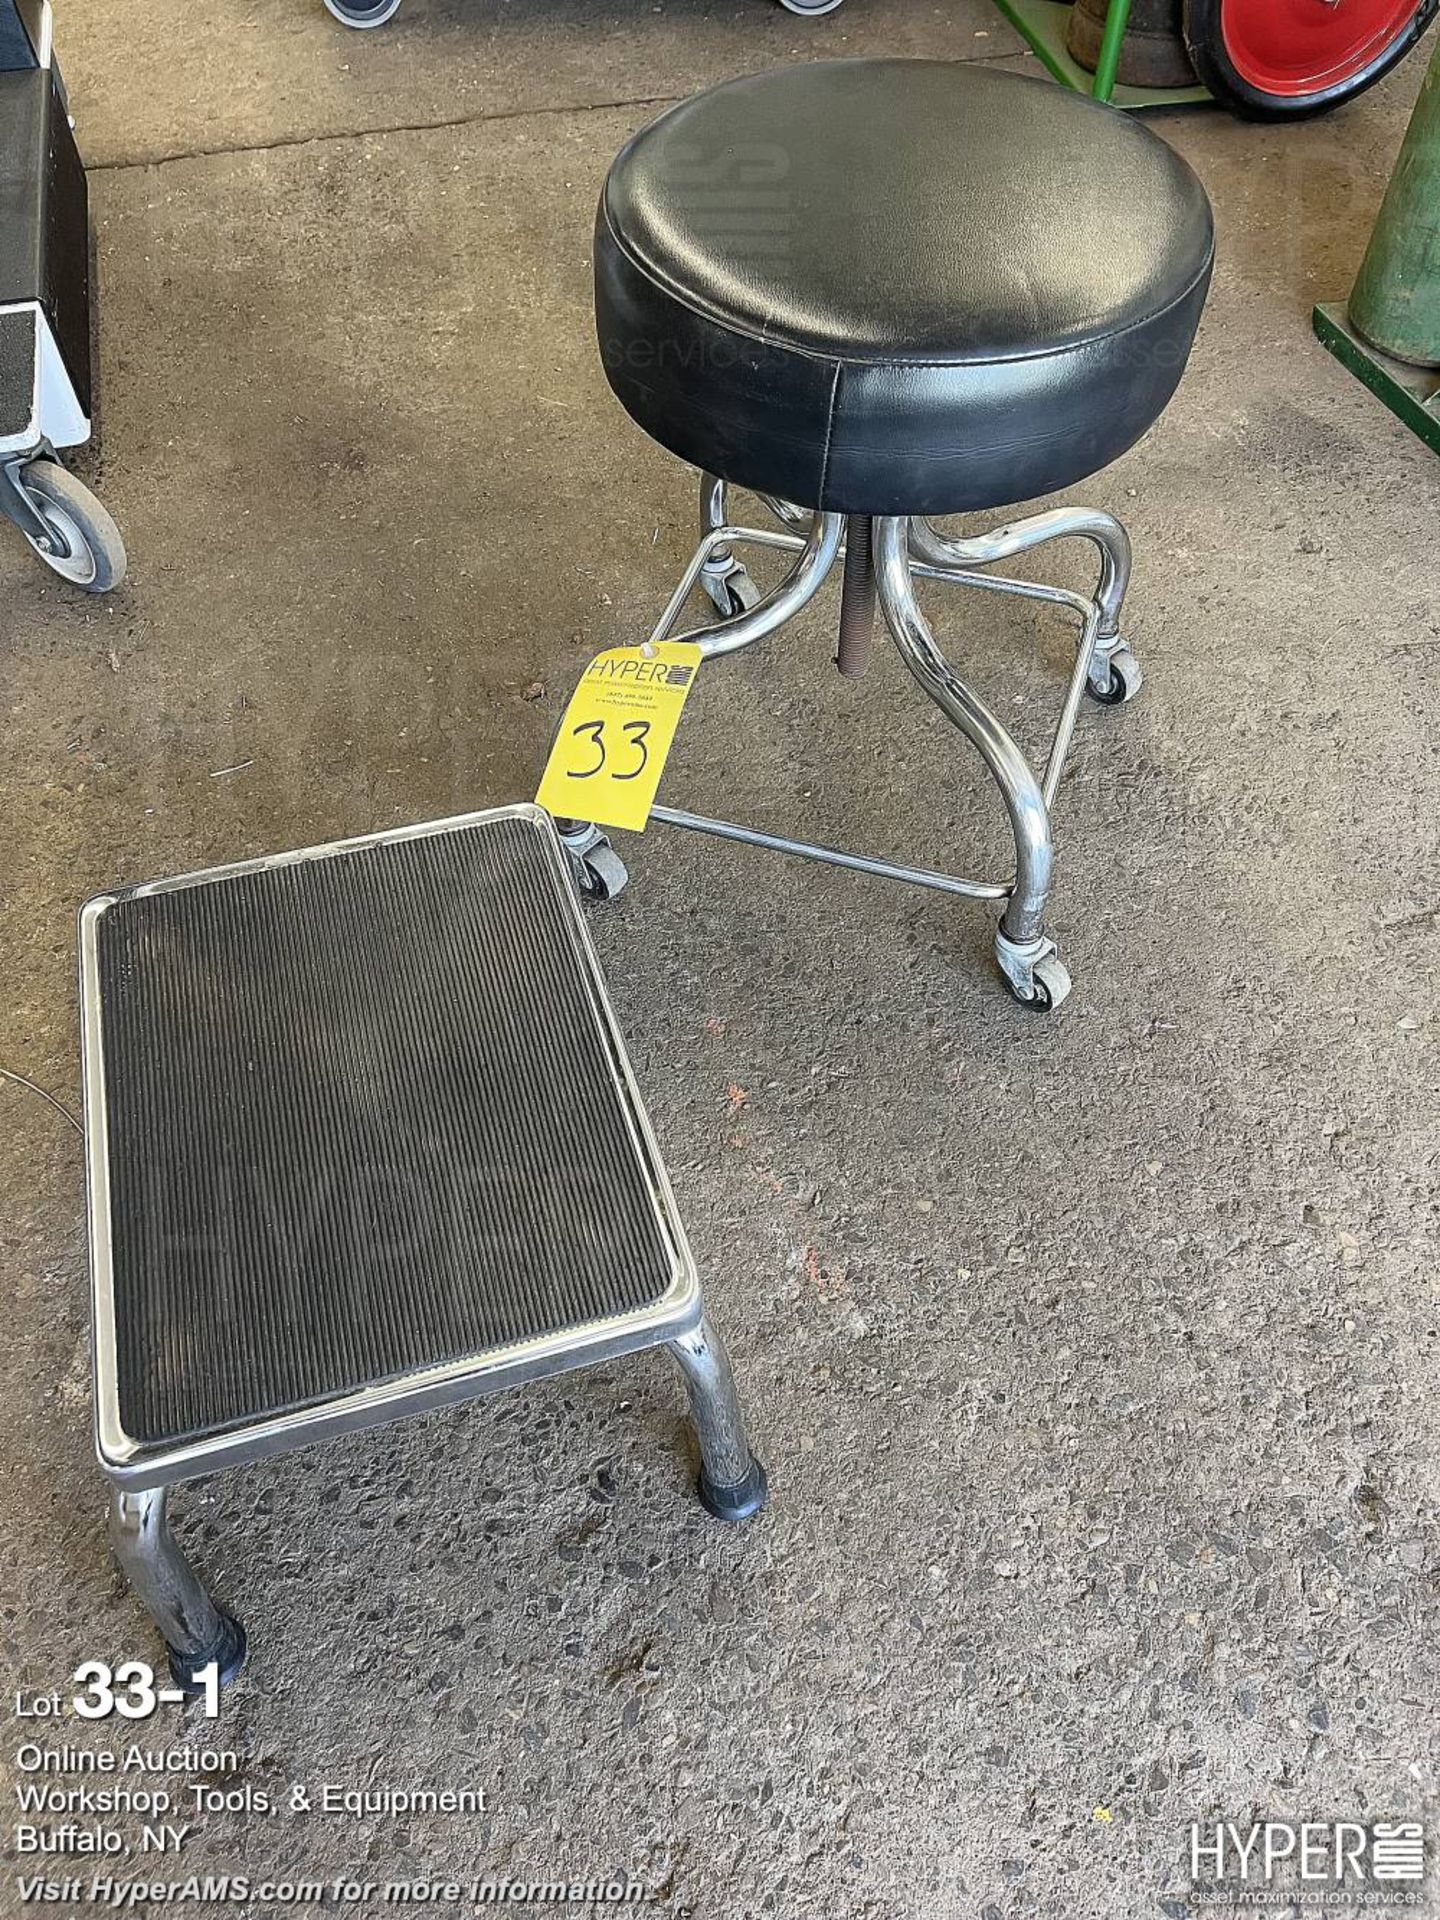 Lot of doctor rolling stool and step